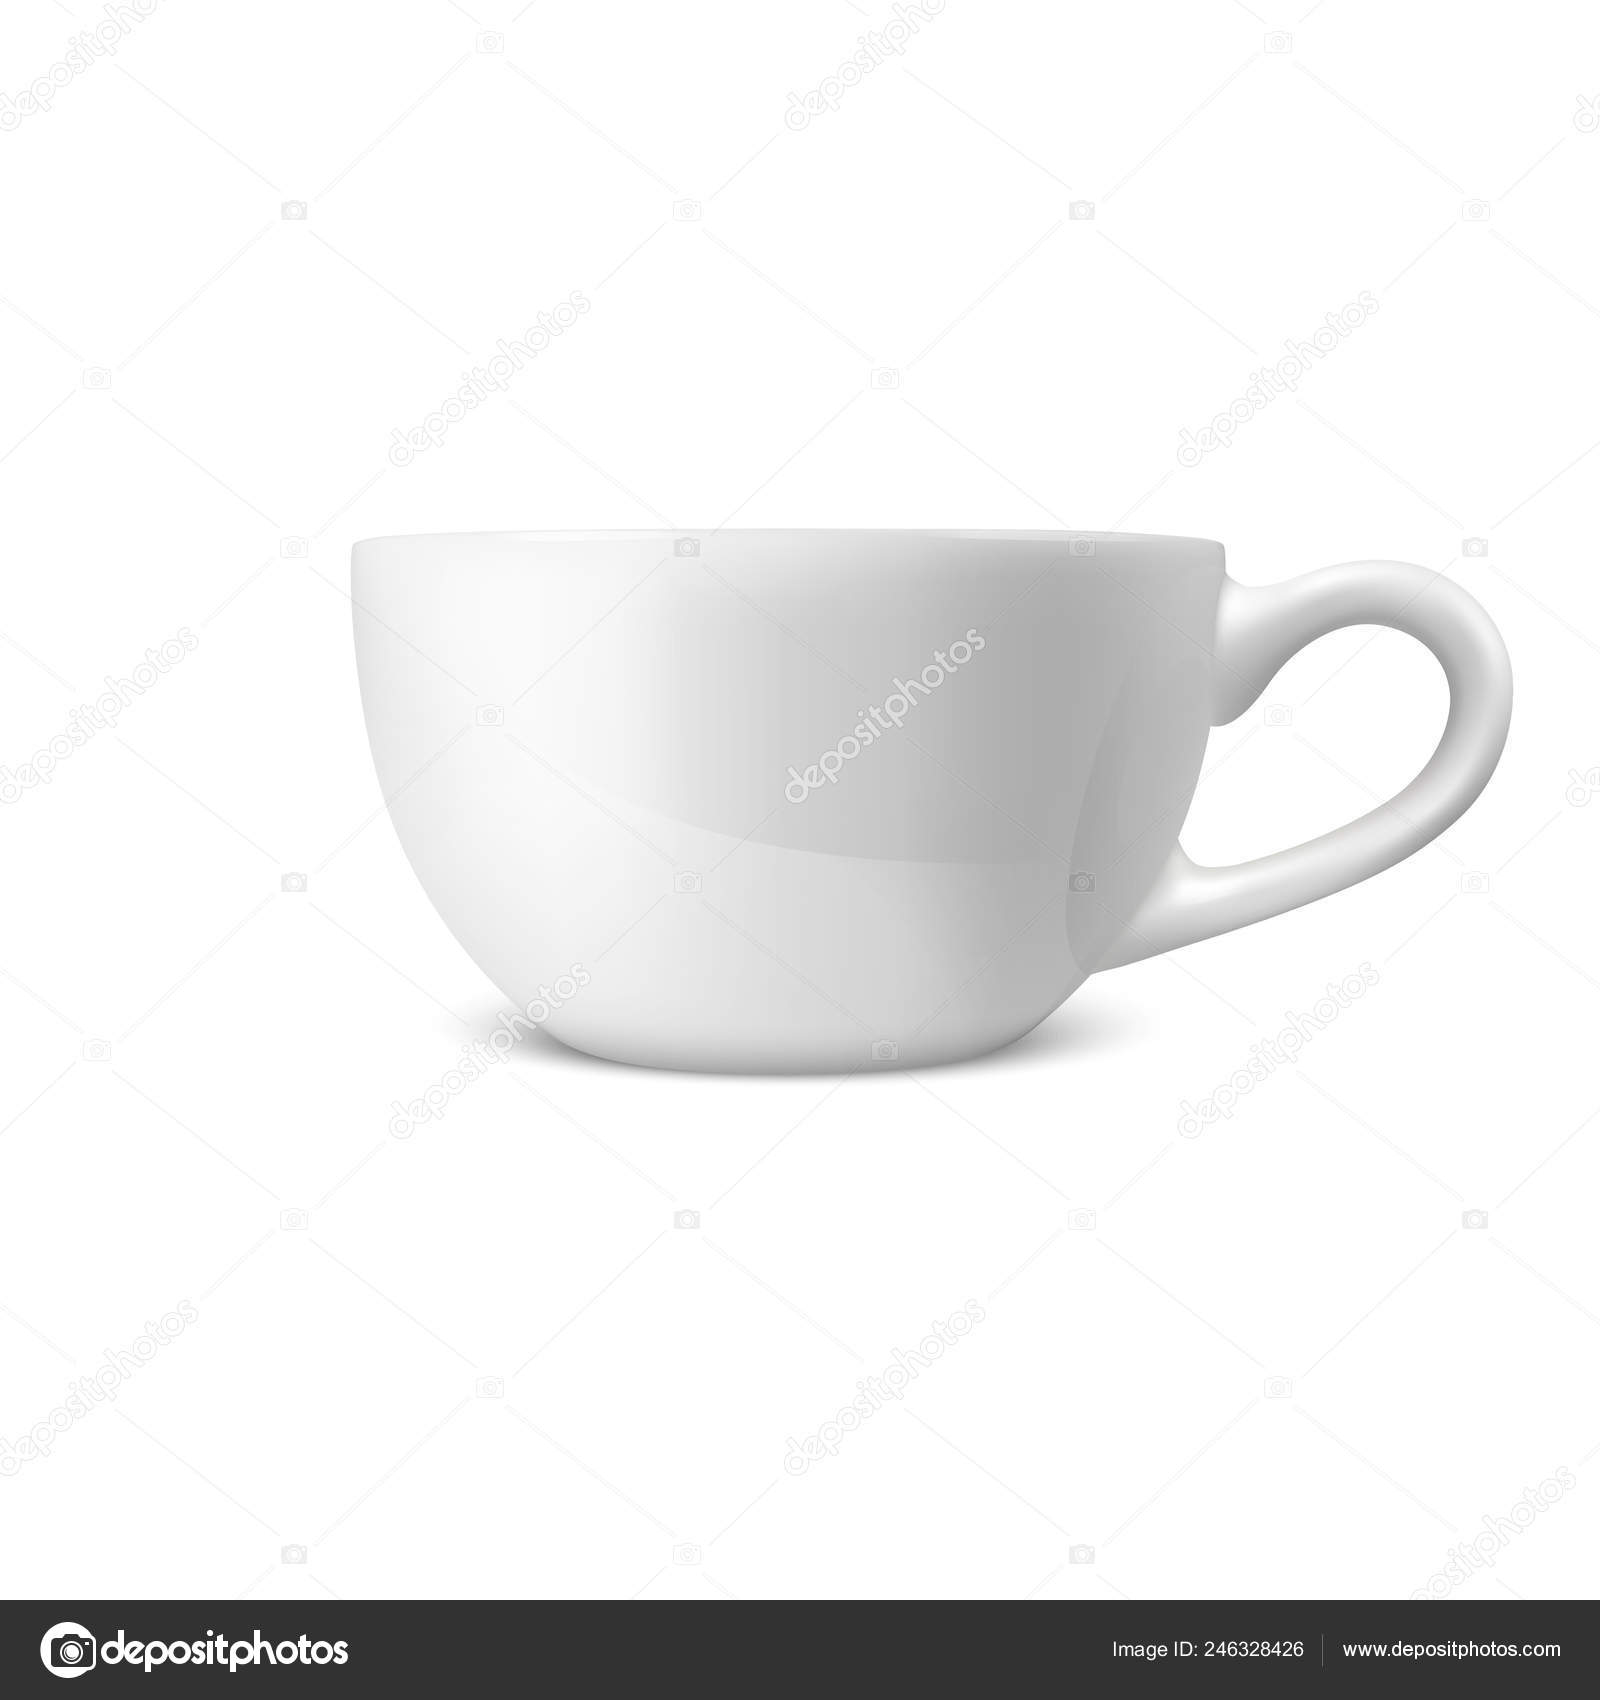 Download Realistic Vector 3d Glossy Blank White Coffee Tea Cup Mug Icon Closeup Isolated On White Background Design Template Of Porcelain Cup Or Mug For Branding Mockup Front View Vector Image By C